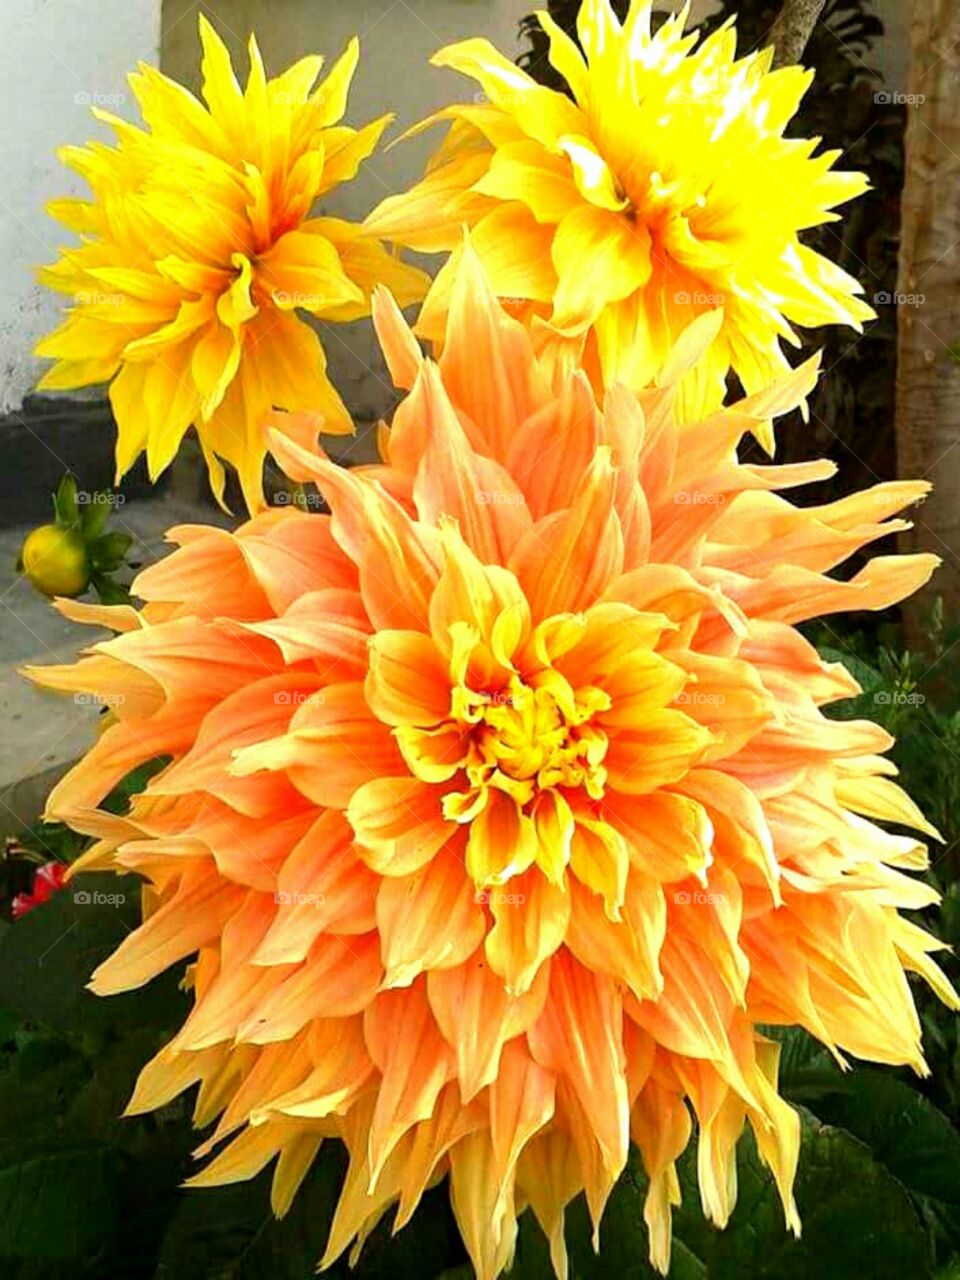 Dallia or Dahlia is a sunflower total, a bipedal plant. Its distribution center is in Mexico and Central America. Dallia plants are planted to increase the sap of gardens due to colorful flowers. In memory of a Swedish tree plant named 'Dahl', Linus